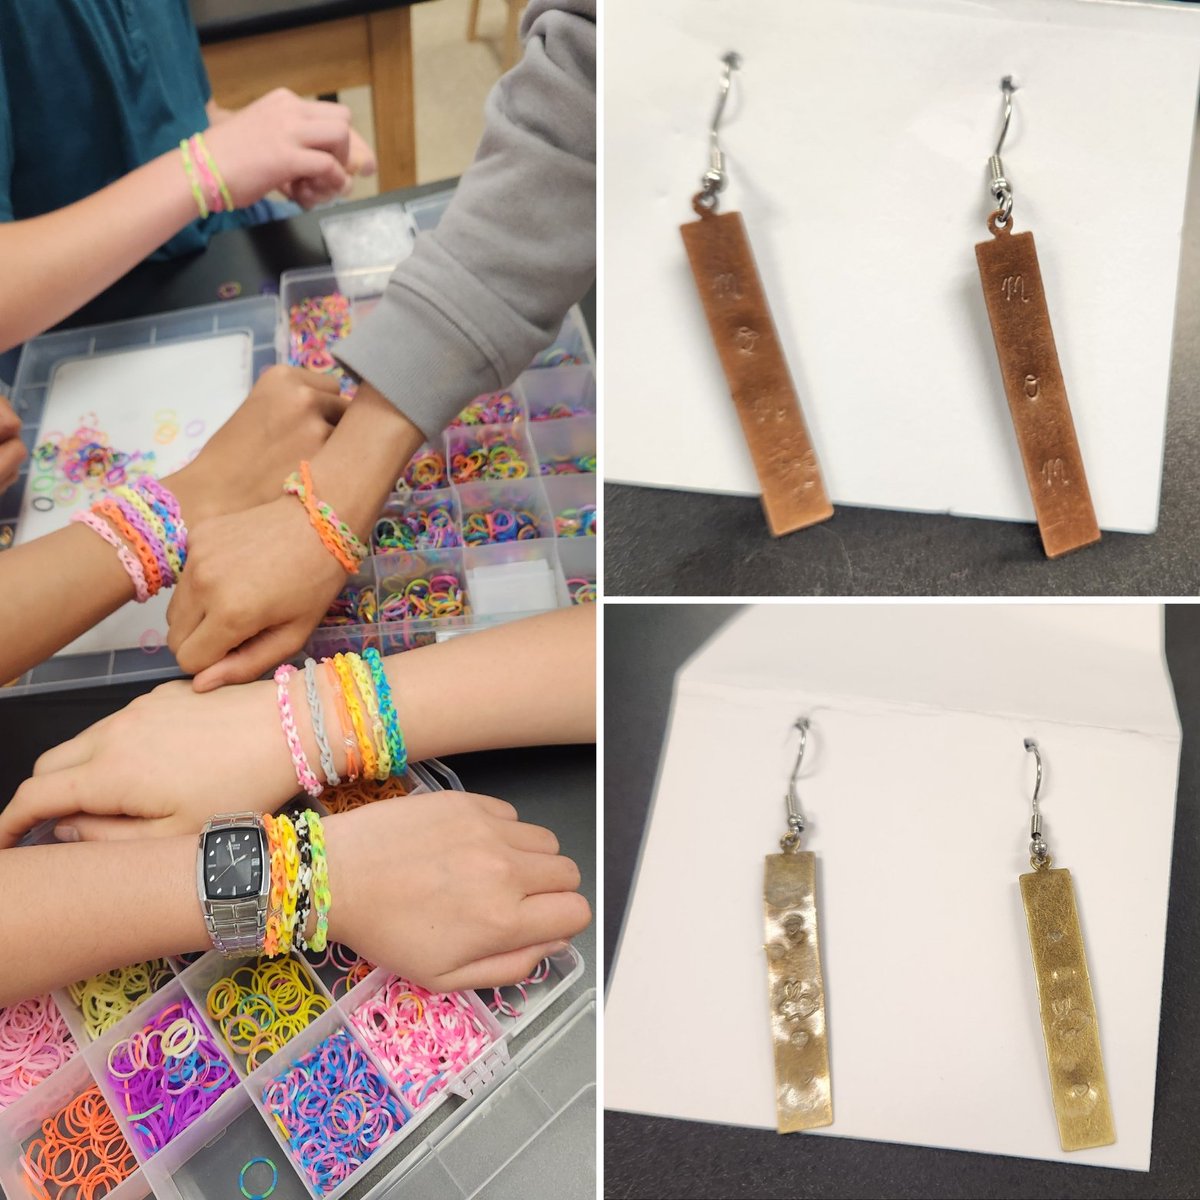 HIVE  - make gifts for important females in our lives in honor of Mother's Day coming up. Students are also working on some bird houses, cards and latch hook #ourbmsa #oaiss